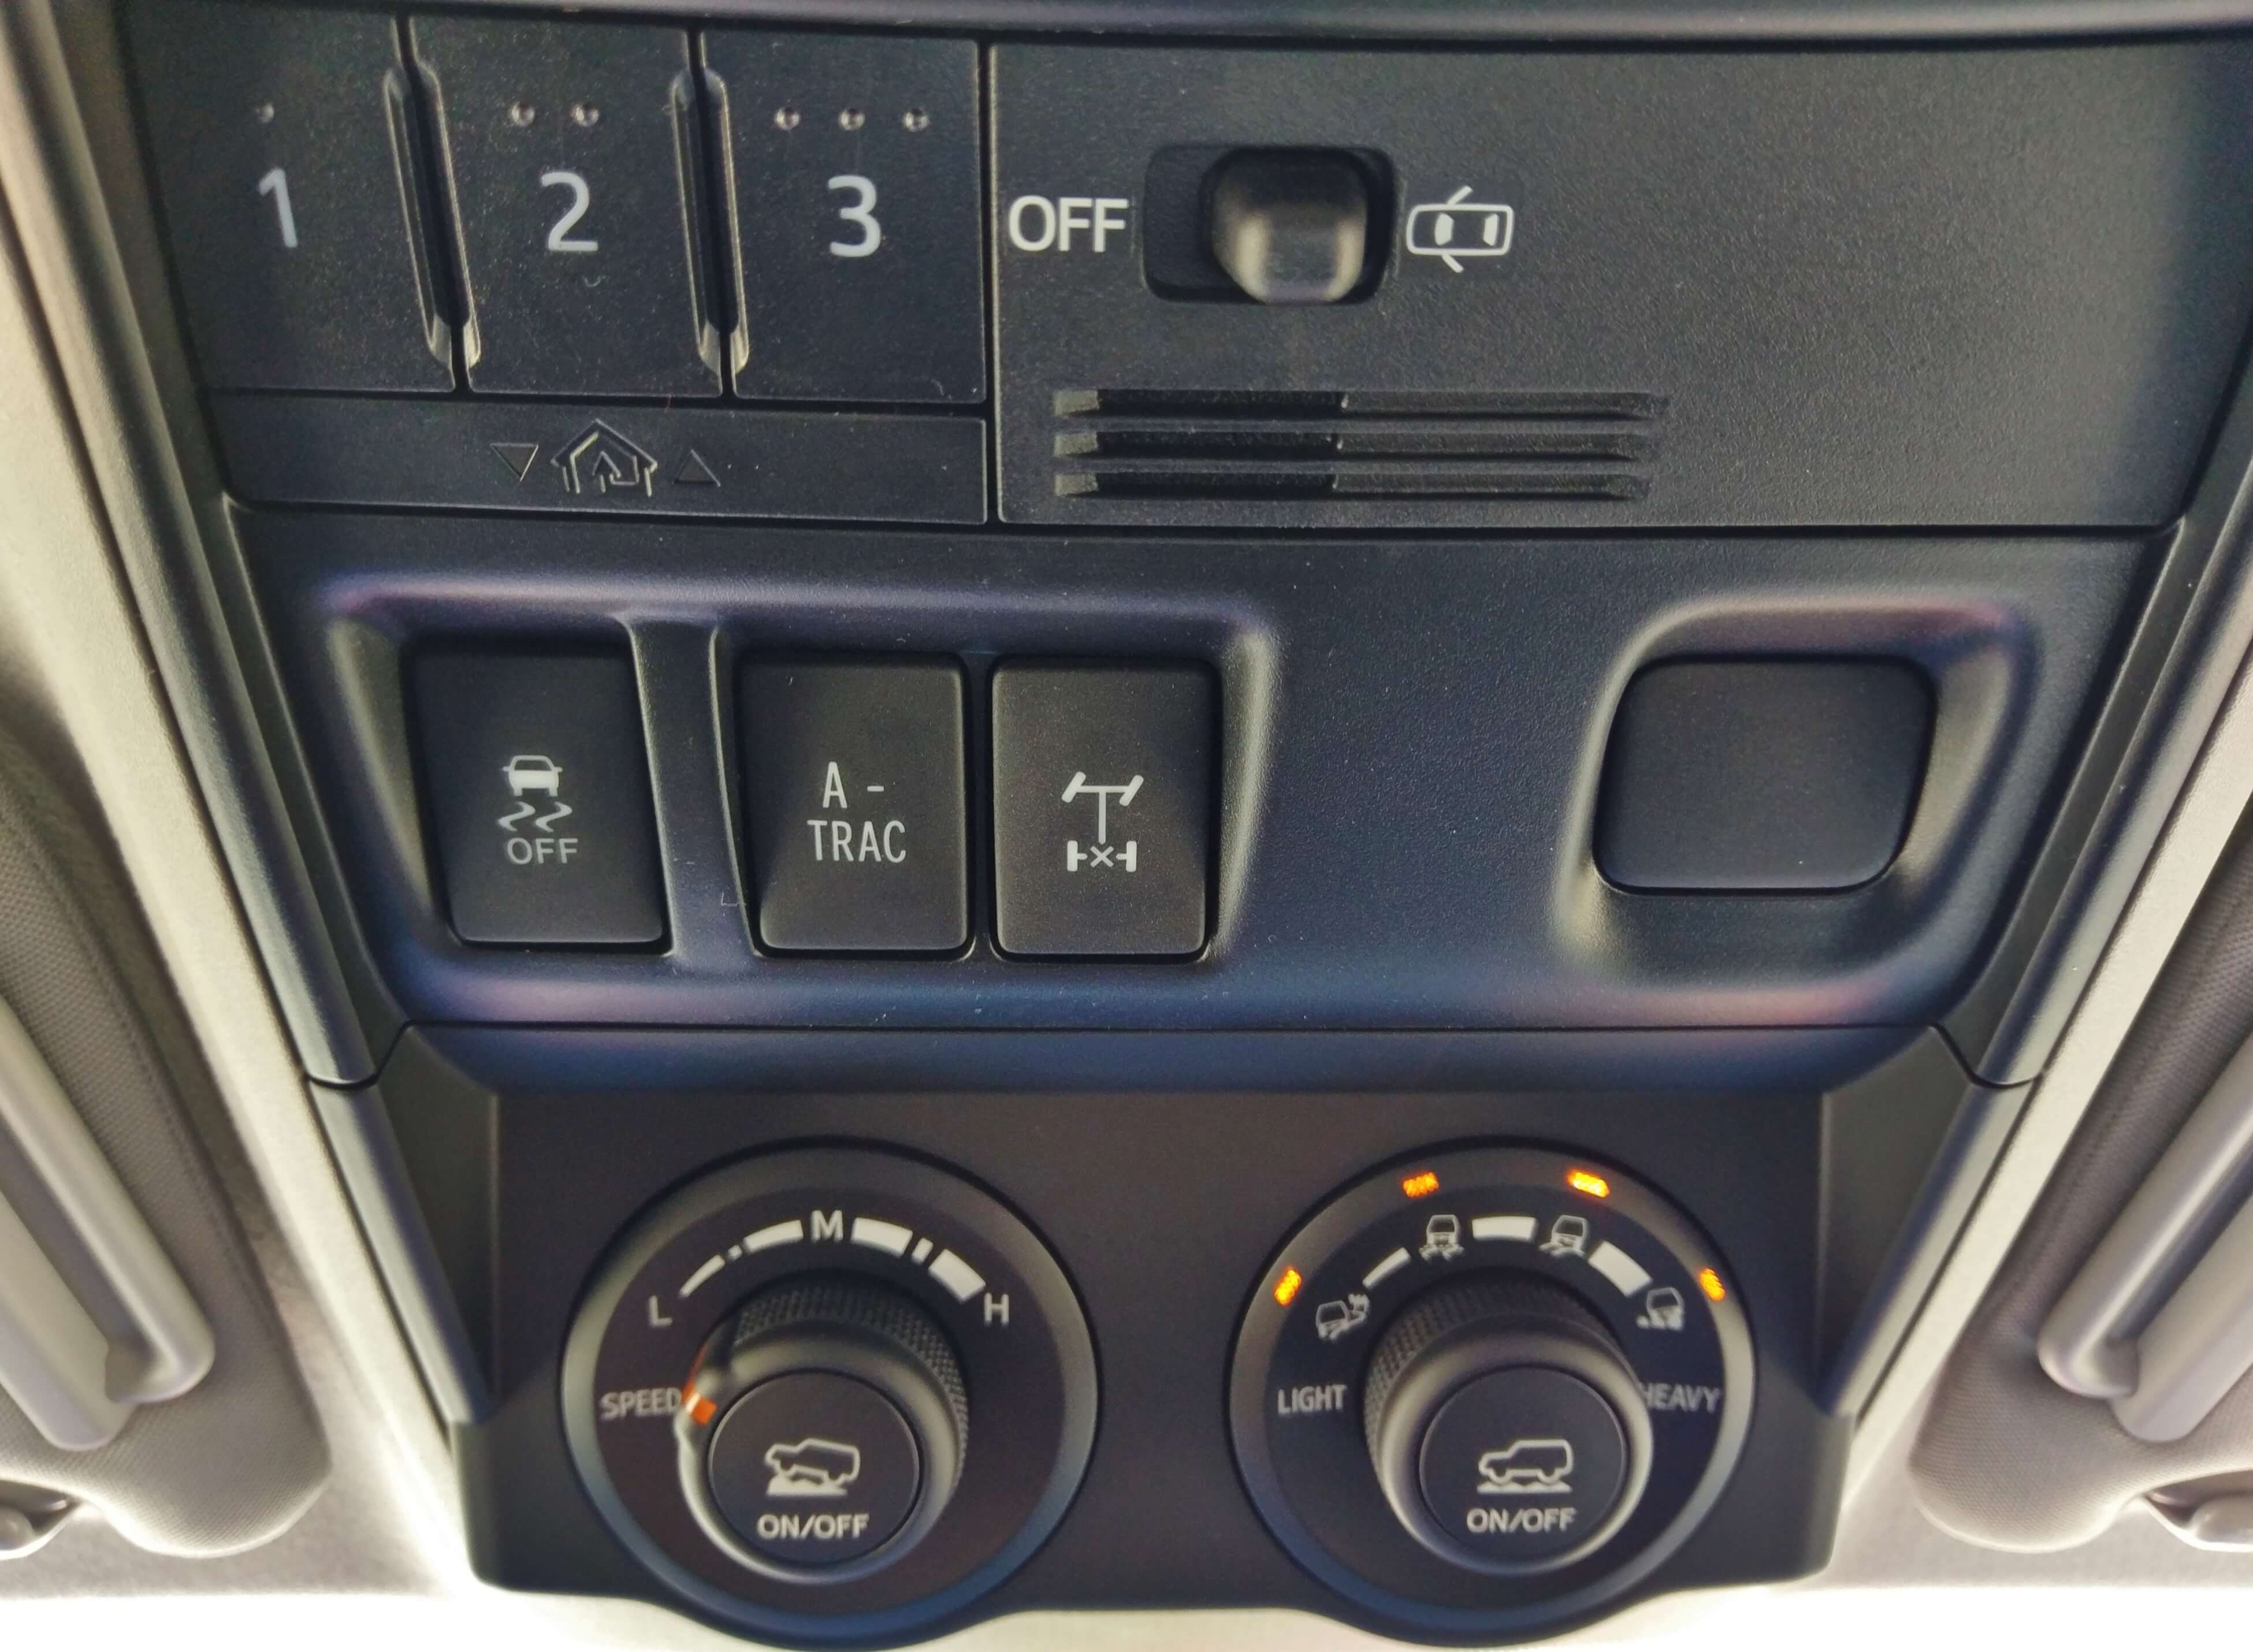 2017 Toyota 4Runner TRD Pro: Overhead control panel: A-TRAC, is basically variable speed cruise control for steep off road descents; Lower right dial adjusts MultiTerrain off-road settings